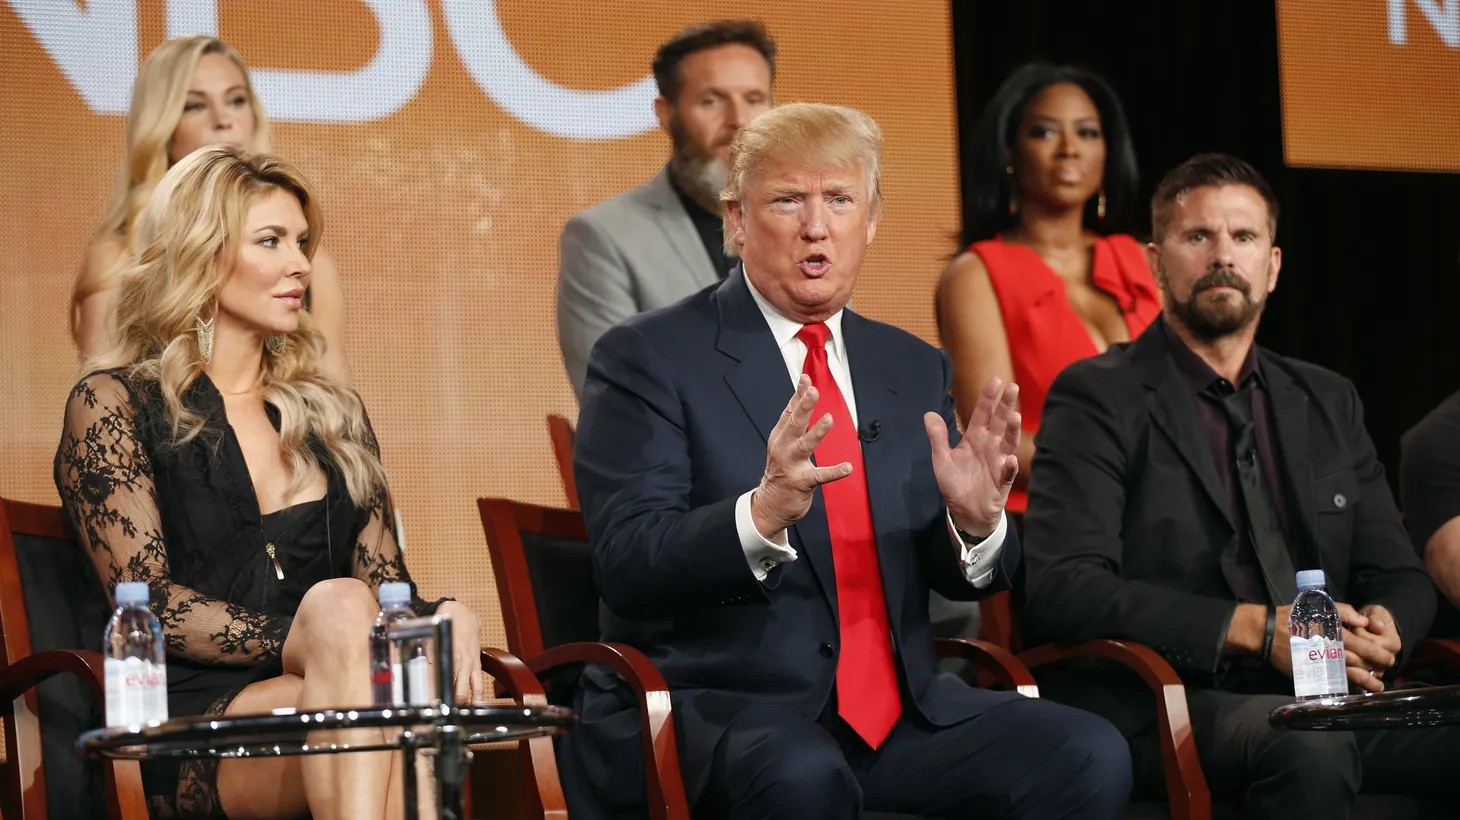 Executive Producer and host Donald Trump (C) speaks about the NBC television show "The Celebrity Apprentice" during the TCA presentations in Pasadena, California, January 16, 2015.